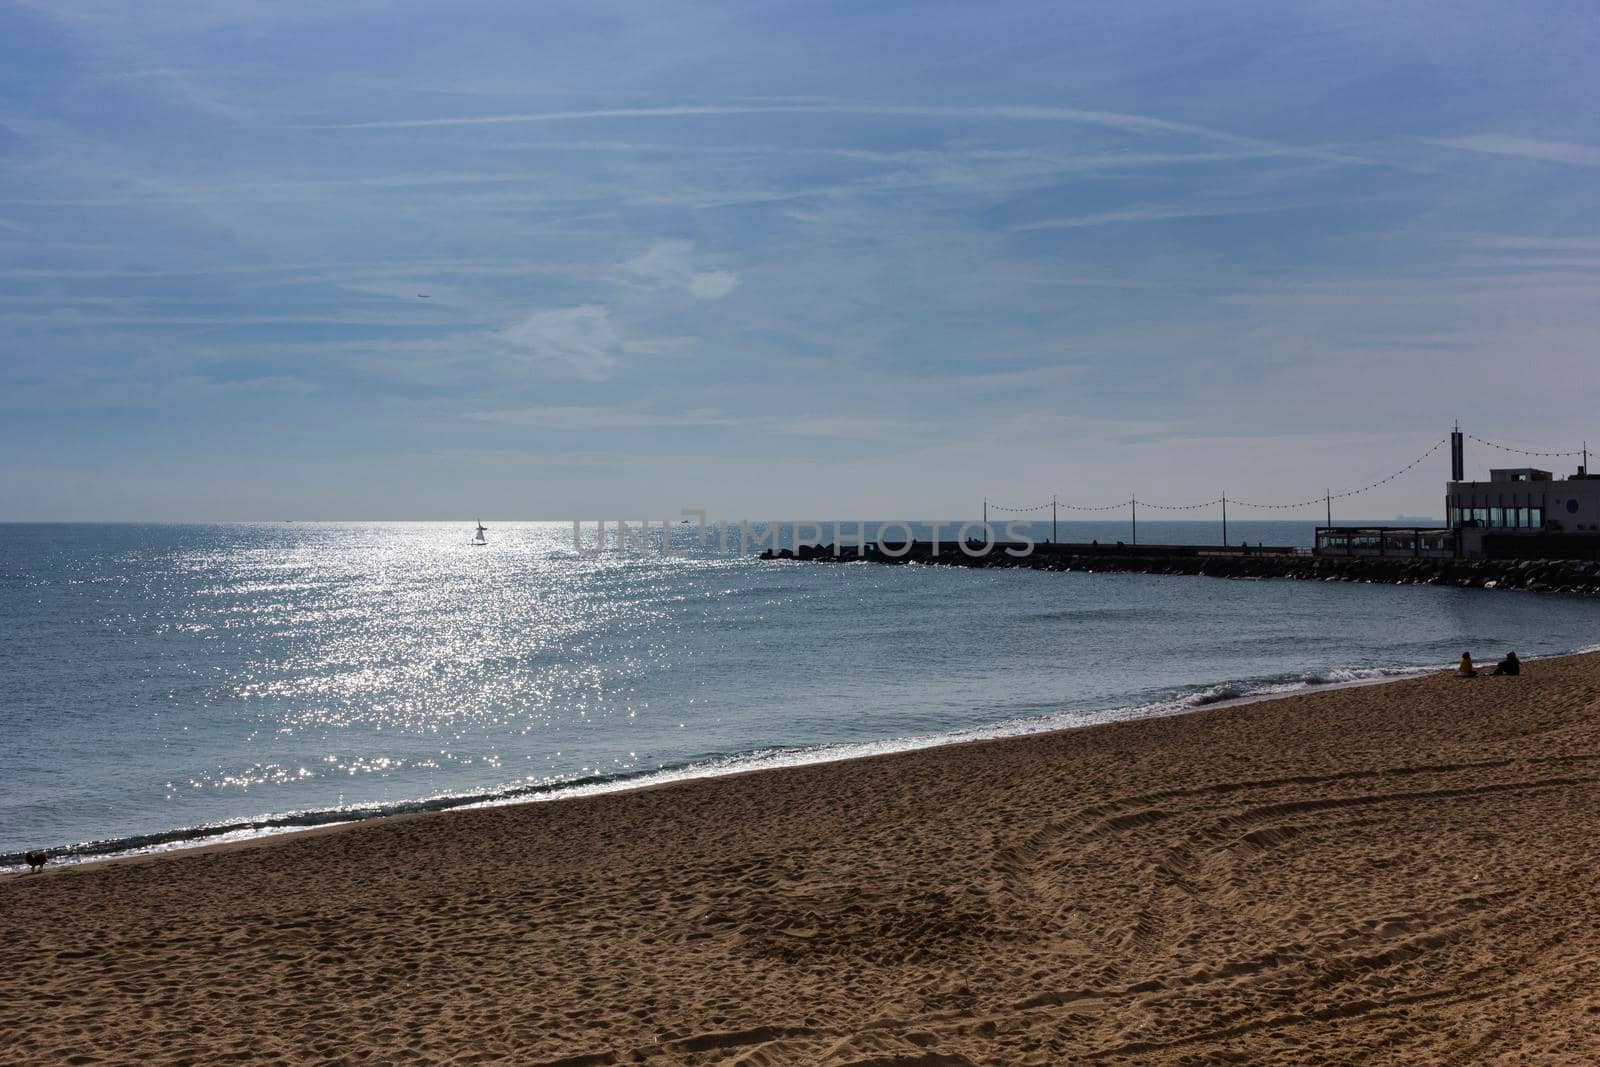 Barcelona beach in winter, with a calm sea and a cloudy blue sky